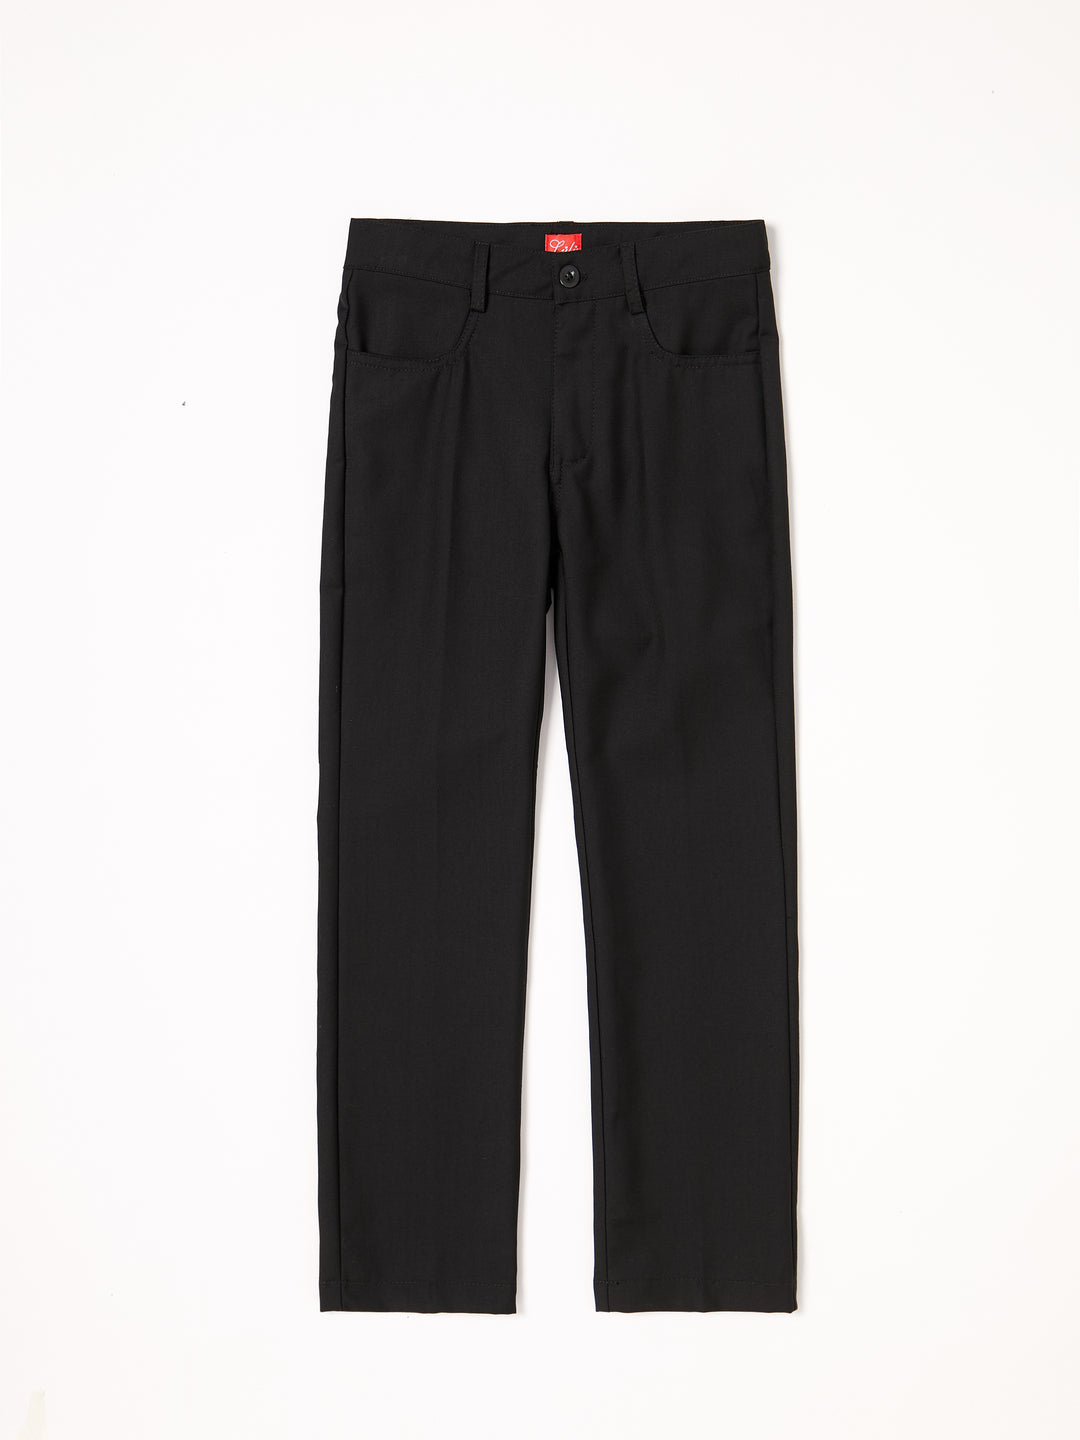 All Year Round Pants - Black